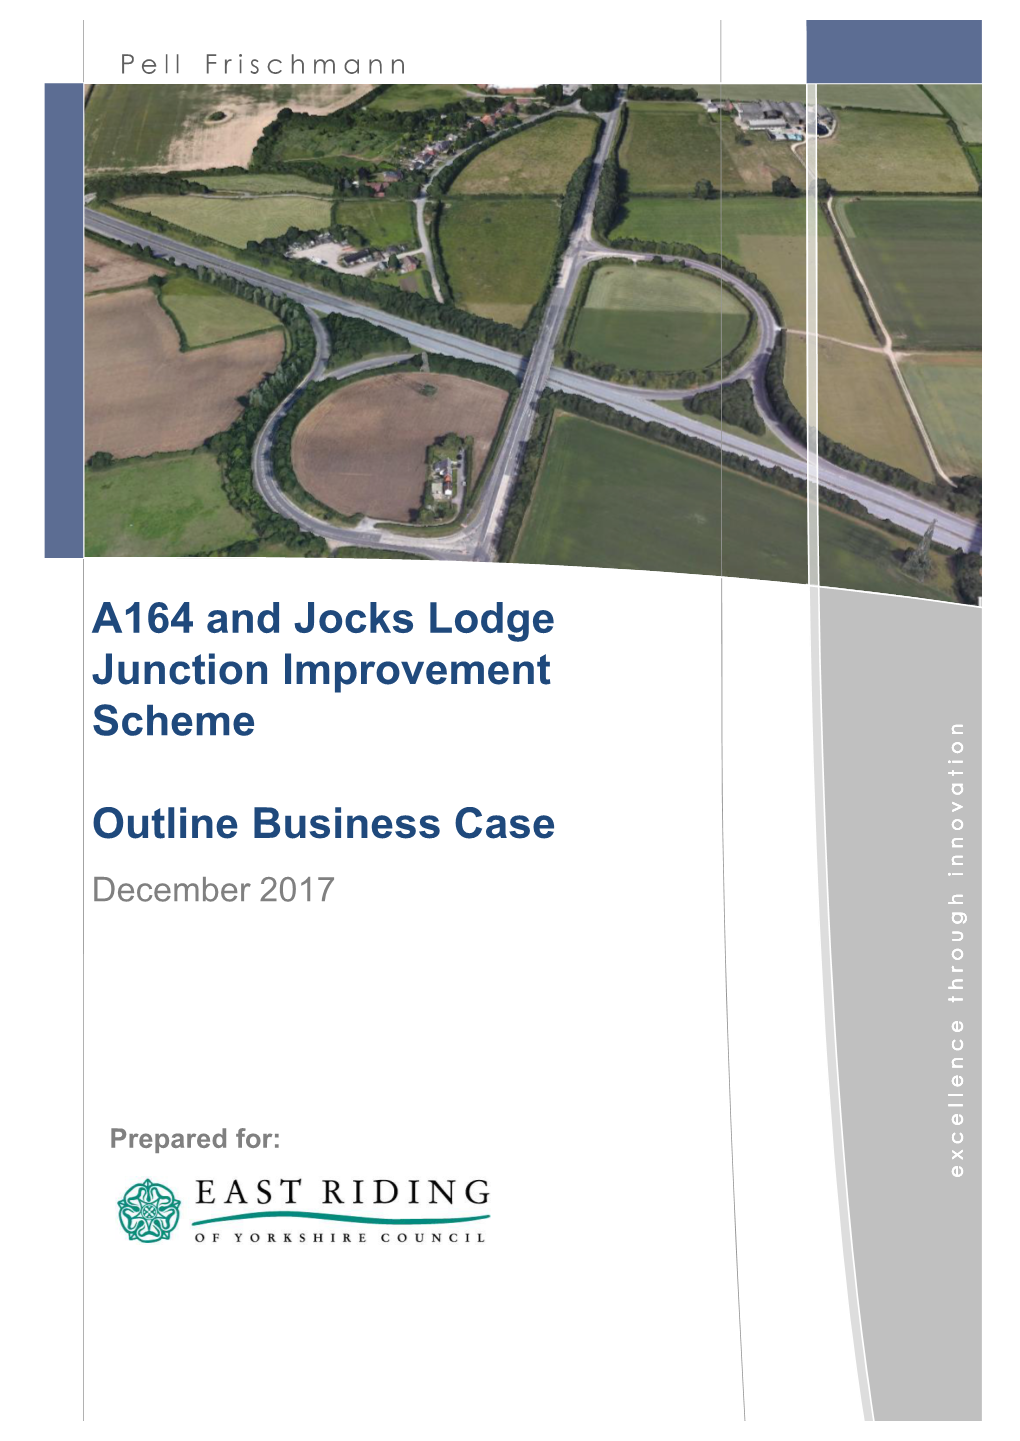 A164 and Jock's Lodge Junction